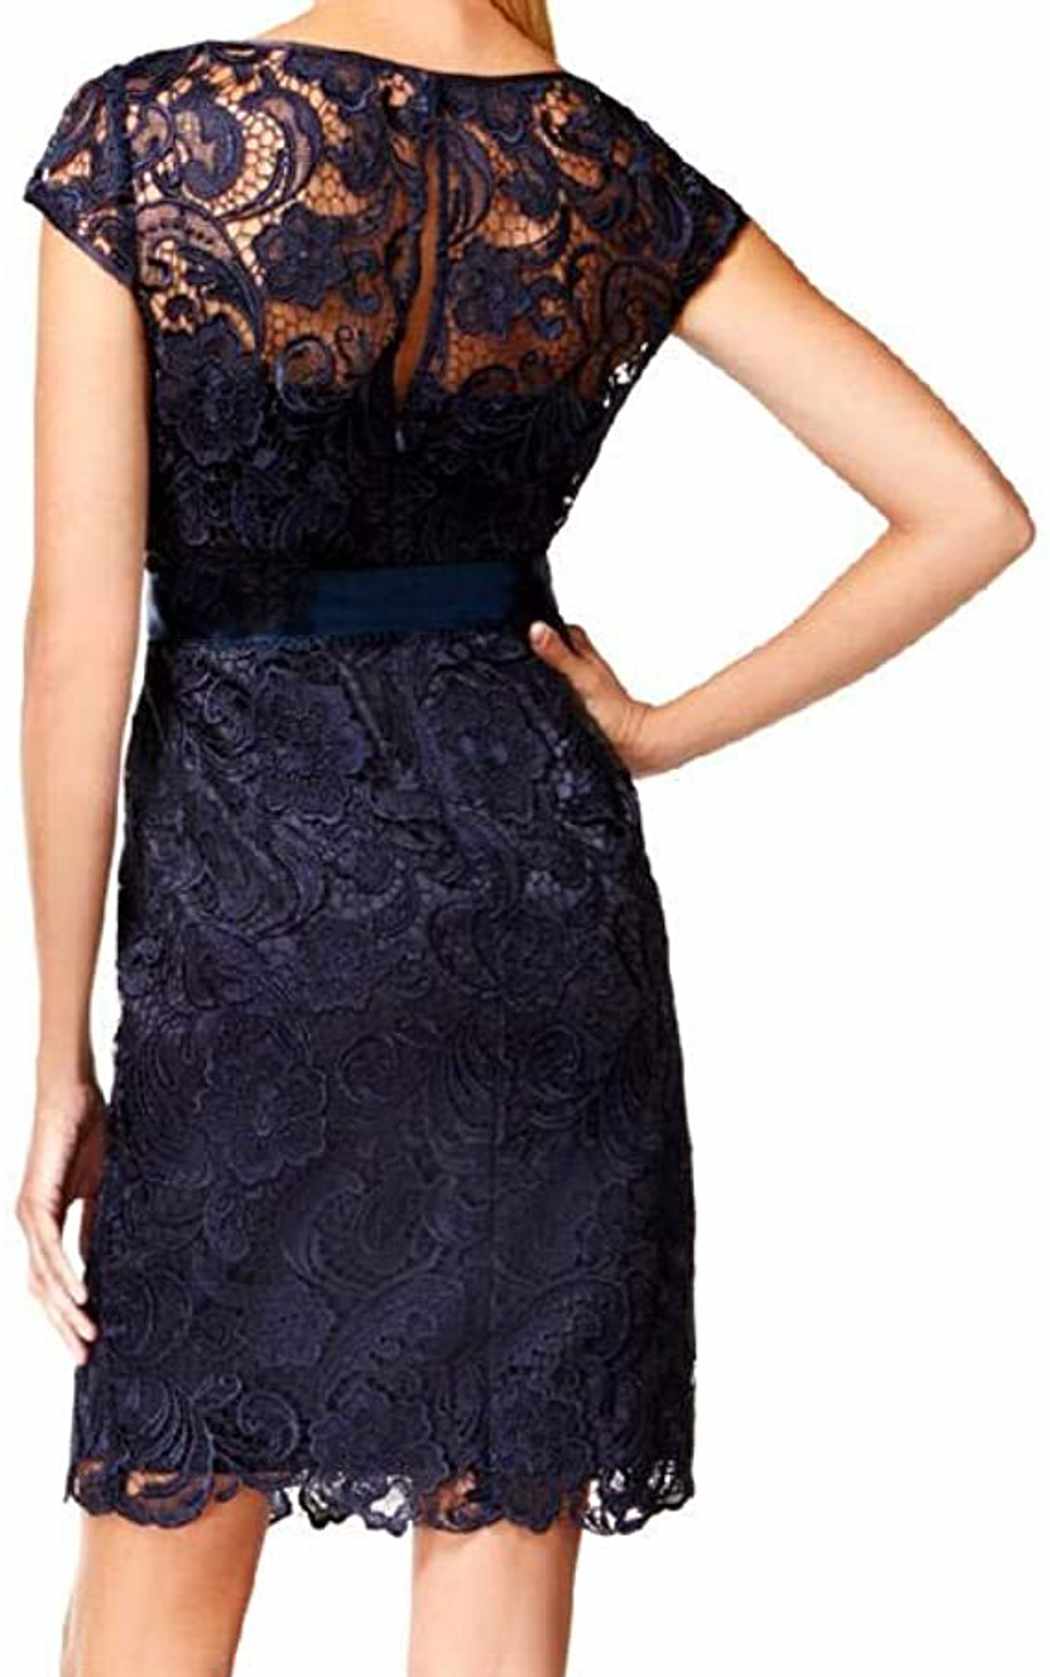 Adrianna Papell Womens Illusion Lace Party Dress Without Ribbon